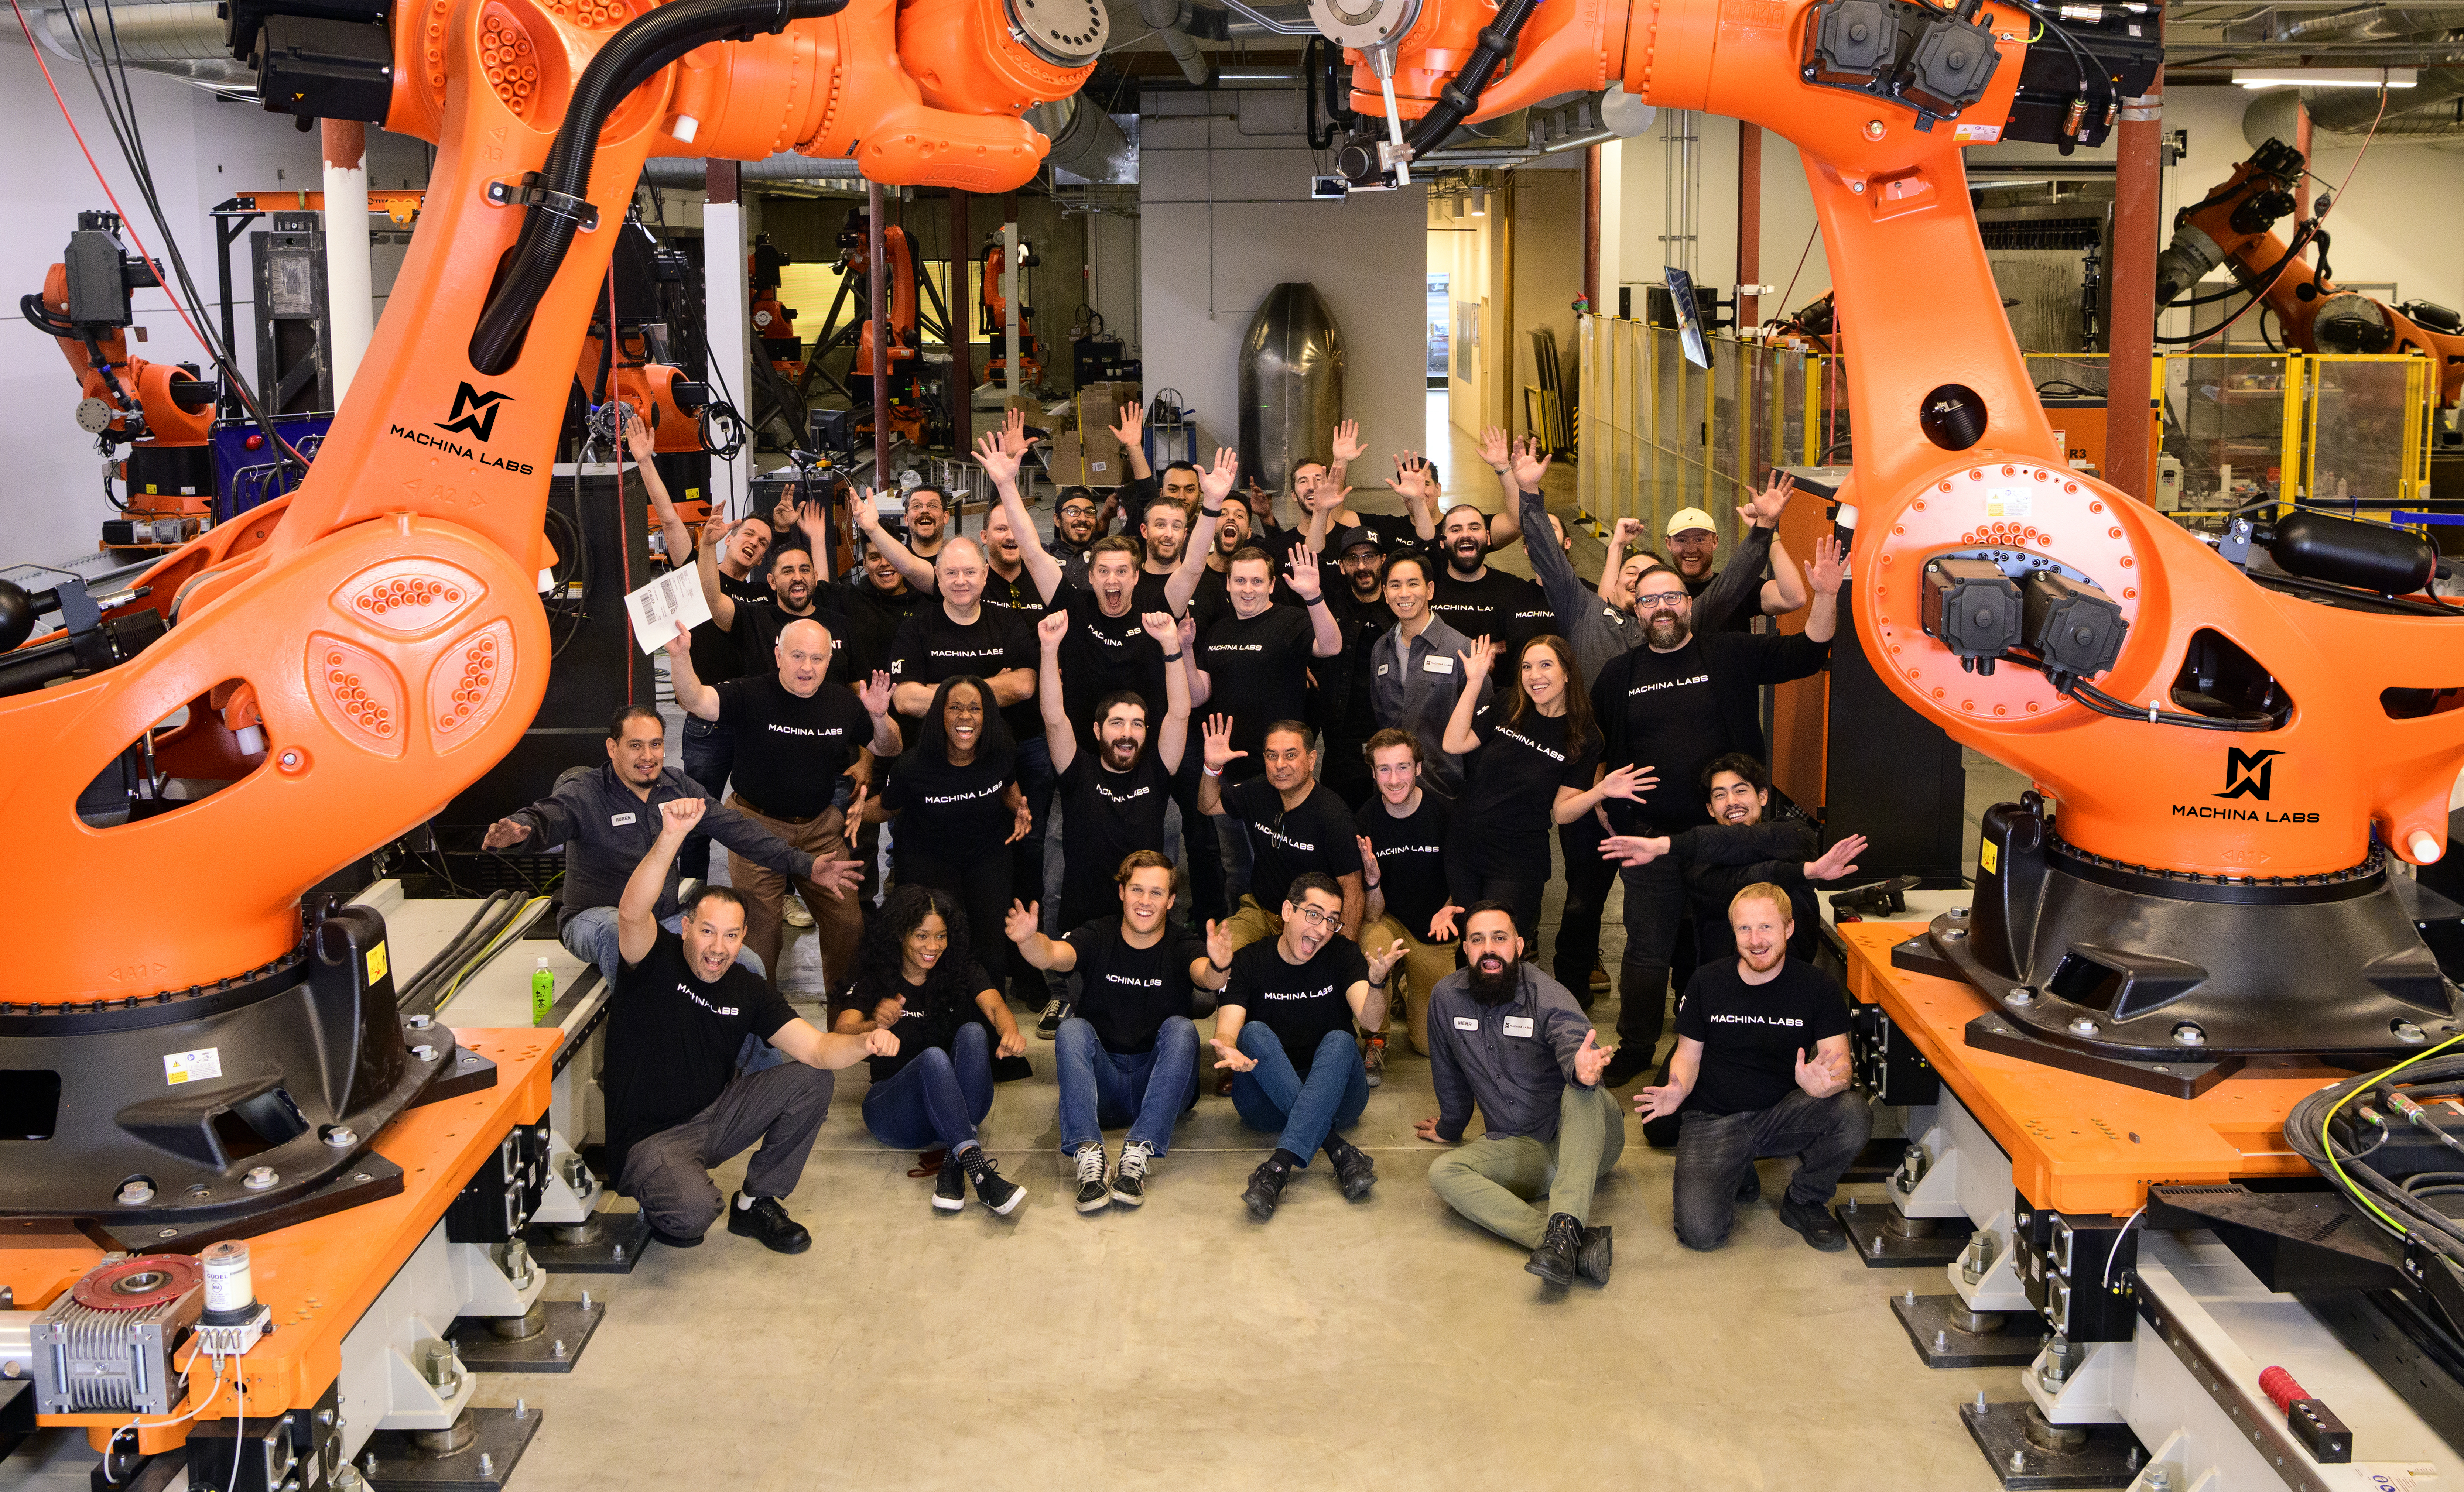 A group of Machina Labs employees pose together.